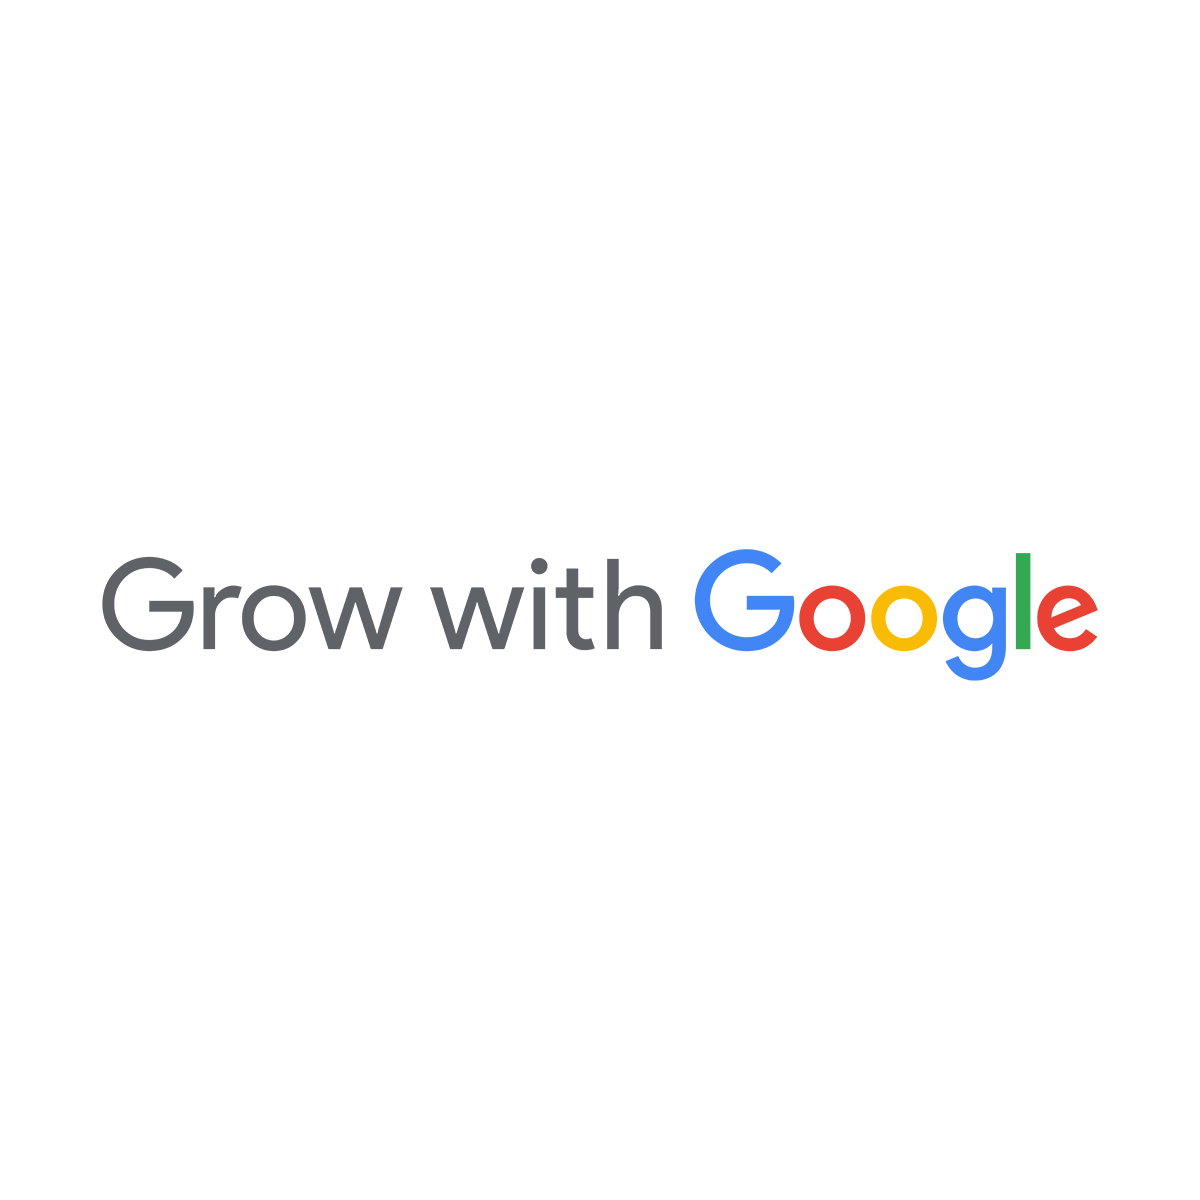 Learn Digital Skills, Prepare for Jobs, Grow Your Business- Grow with Google